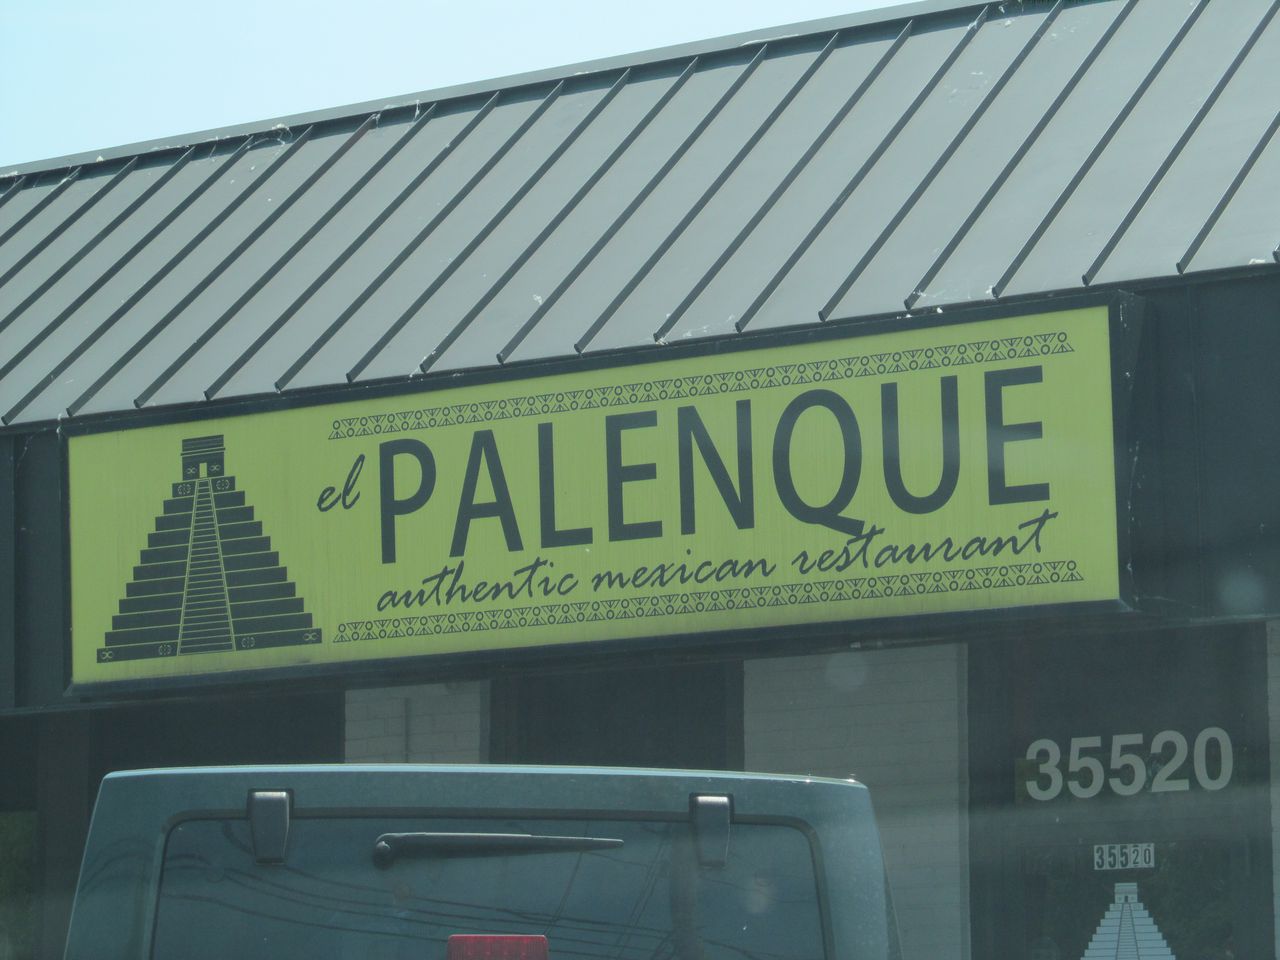 El Palenque has one of the highest health inspector violation counts in Lake County.